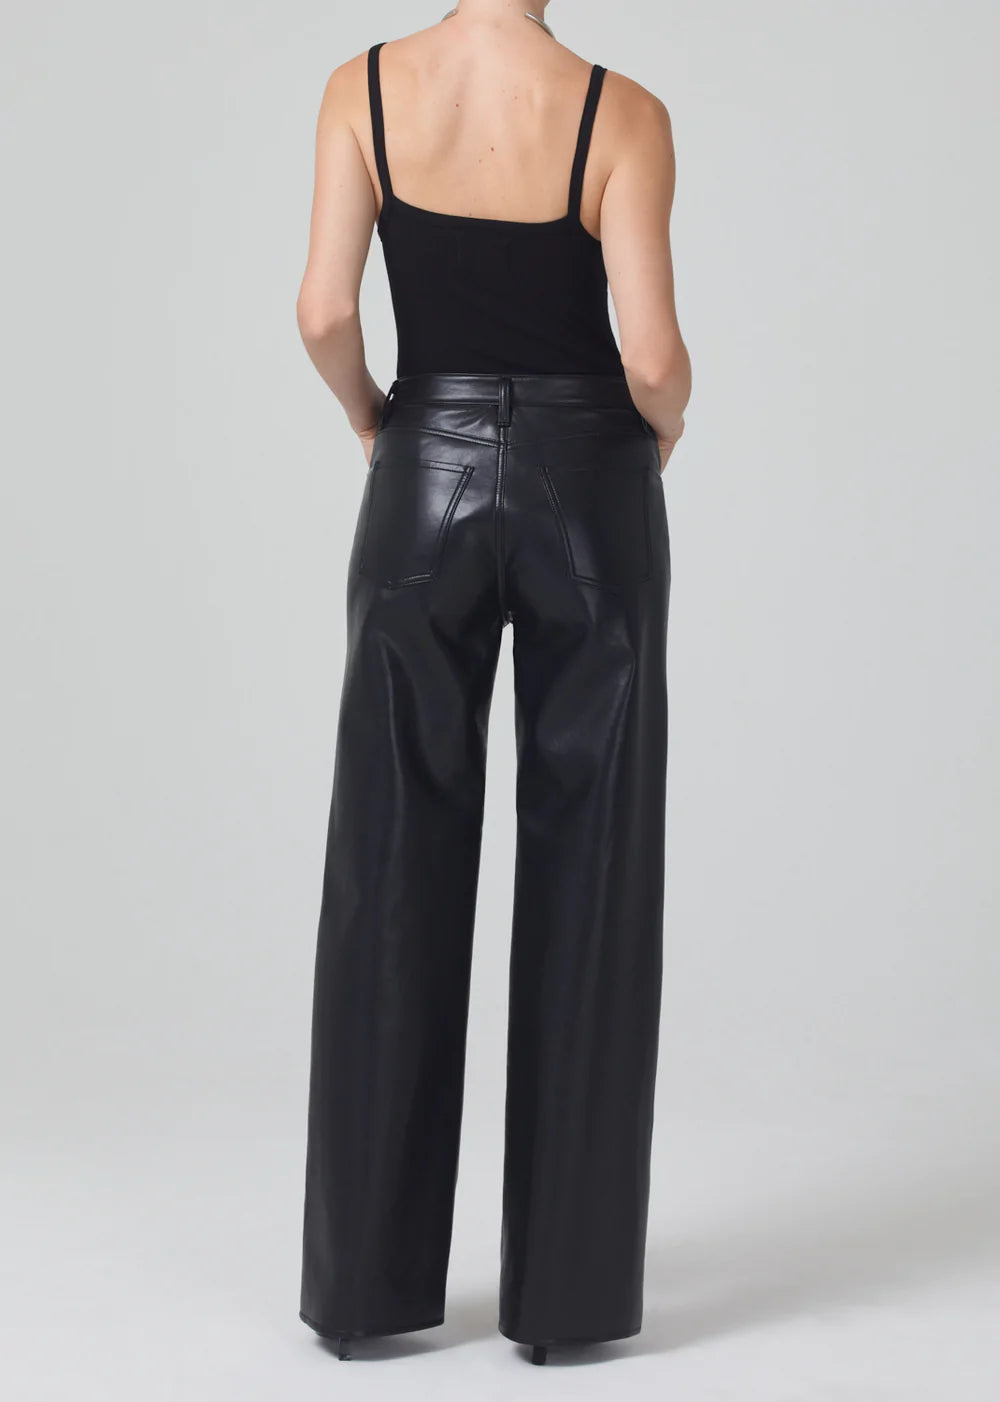 Recycled Leather Annina Trouser Jean in Black